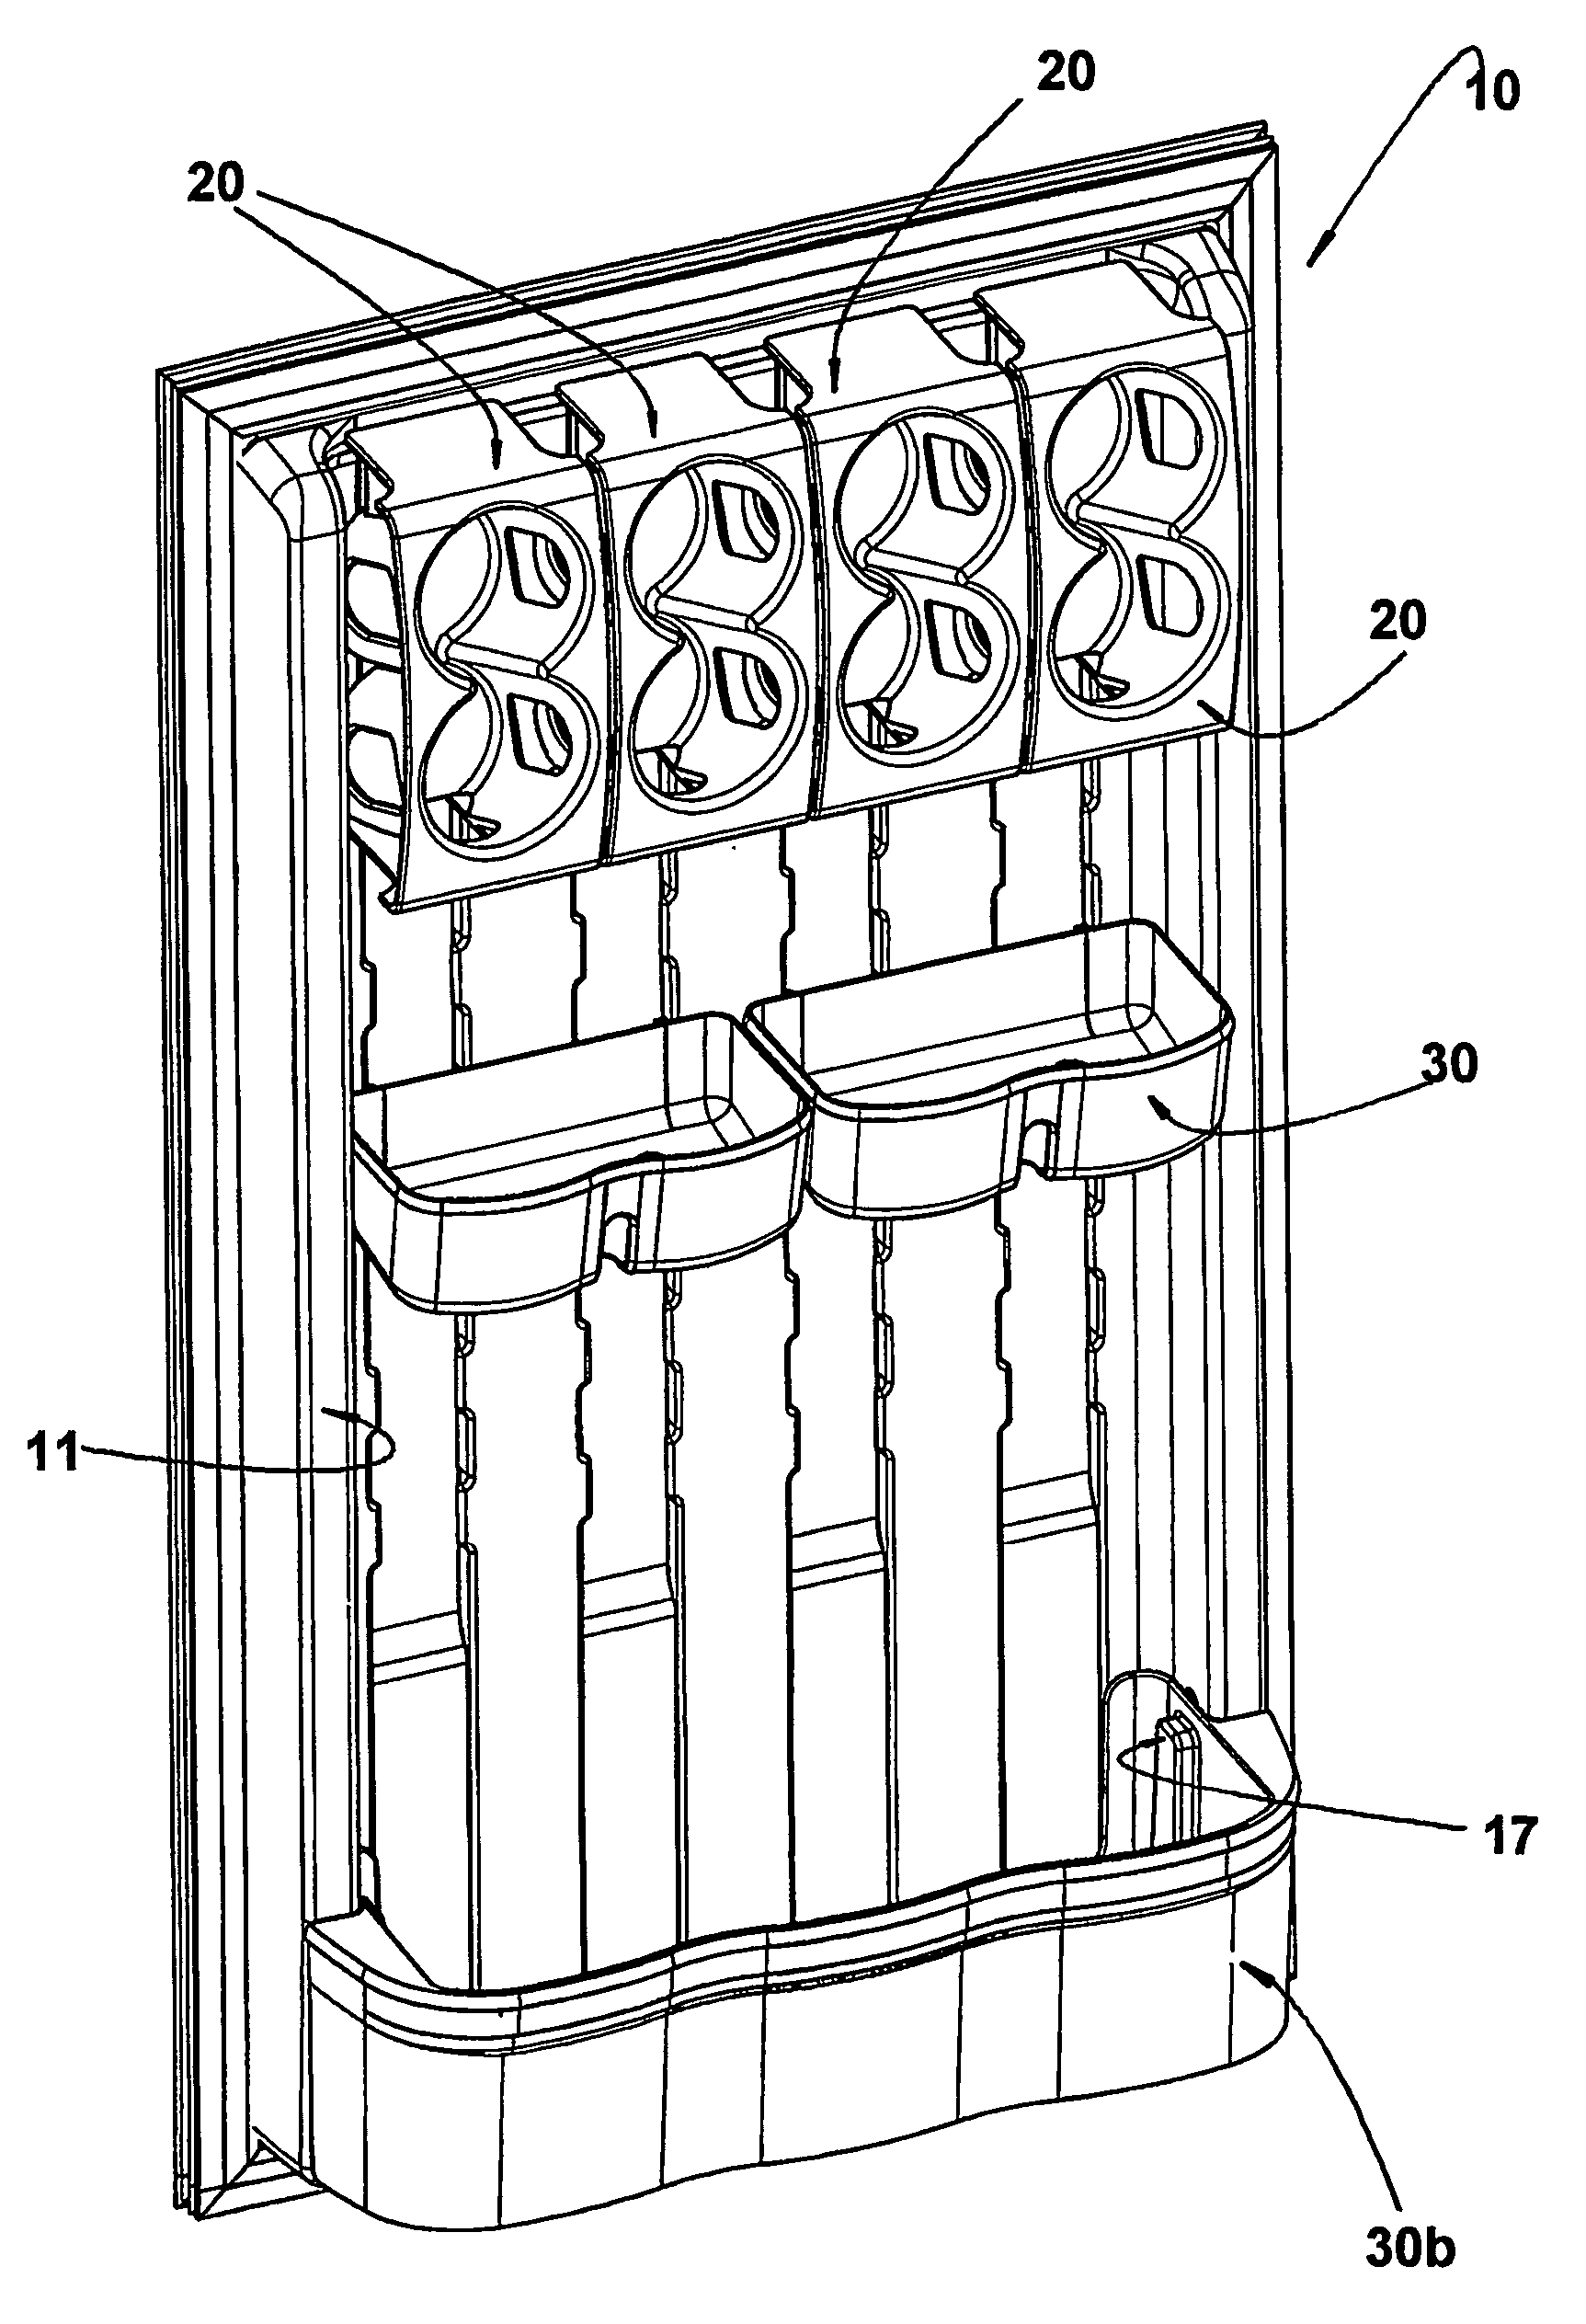 Accessory arrangement for a refrigerator door and can holder for a refrigerator